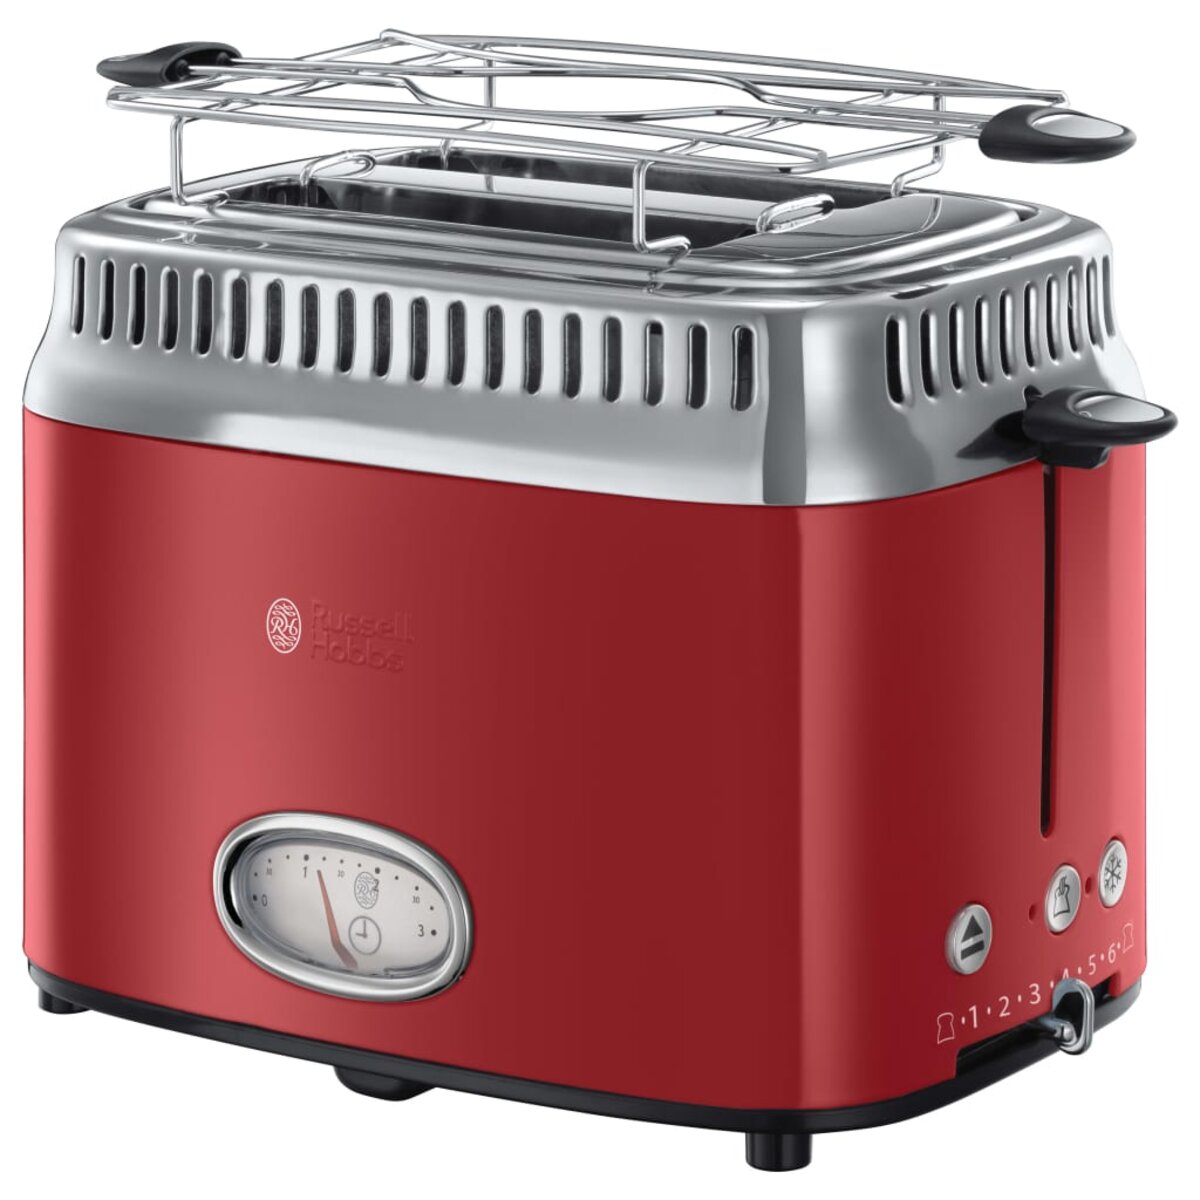 Russell hobbs grille-pain retro rouge 1300 w - La Poste